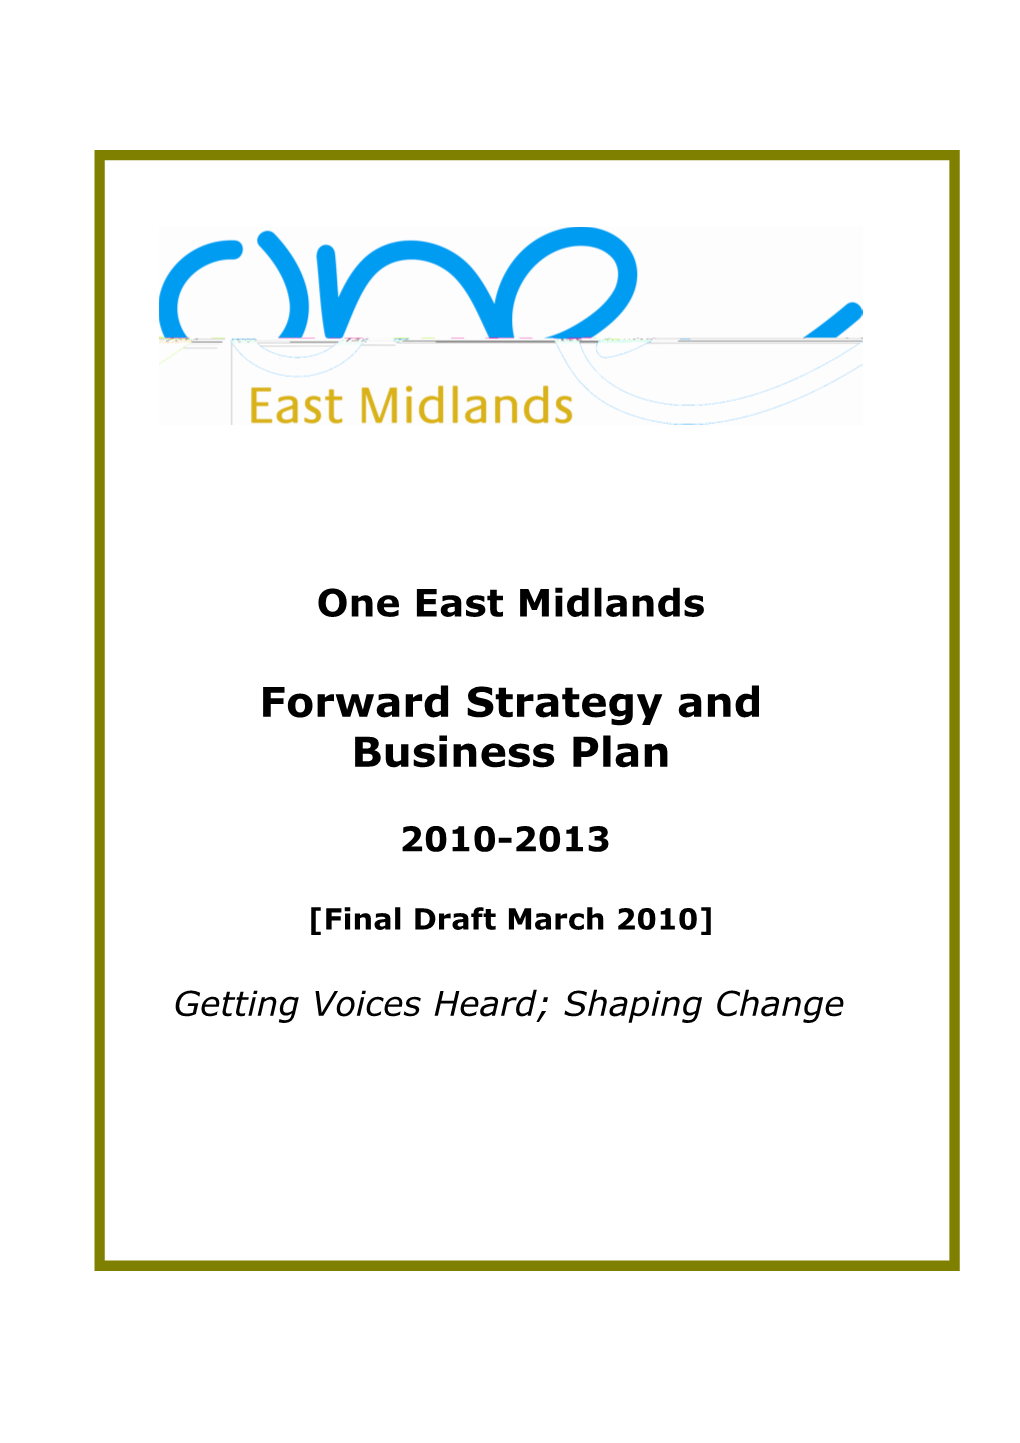 One East Midlands